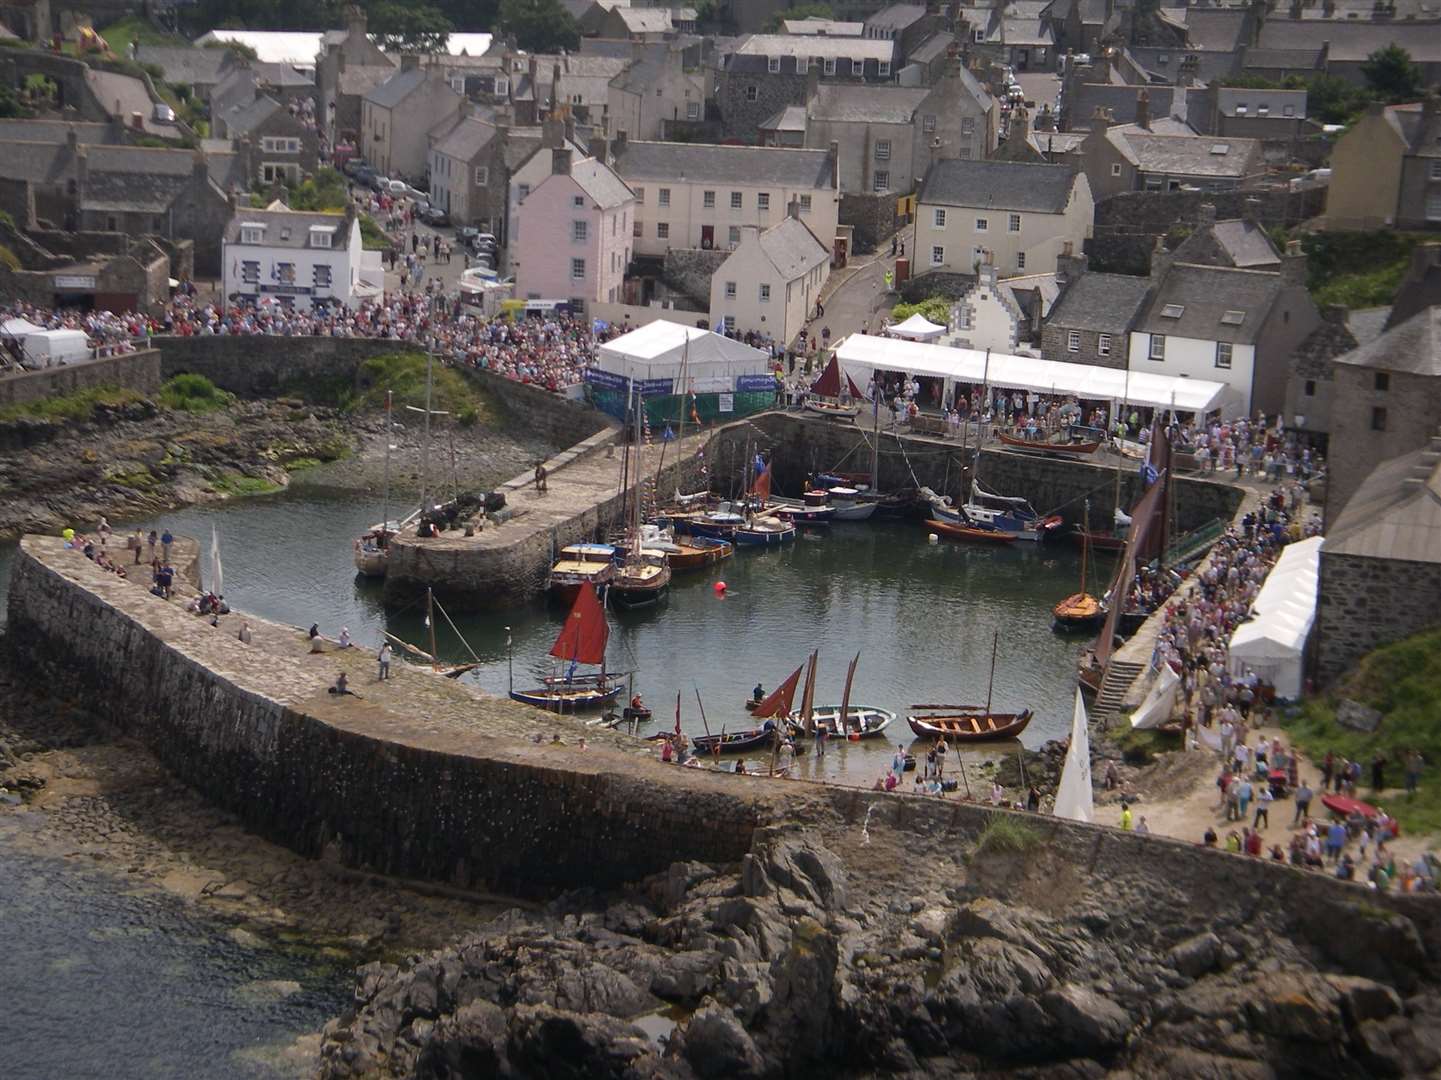 The Scottish Traditional Boat Festival in Portsoy is looking for volunteers.